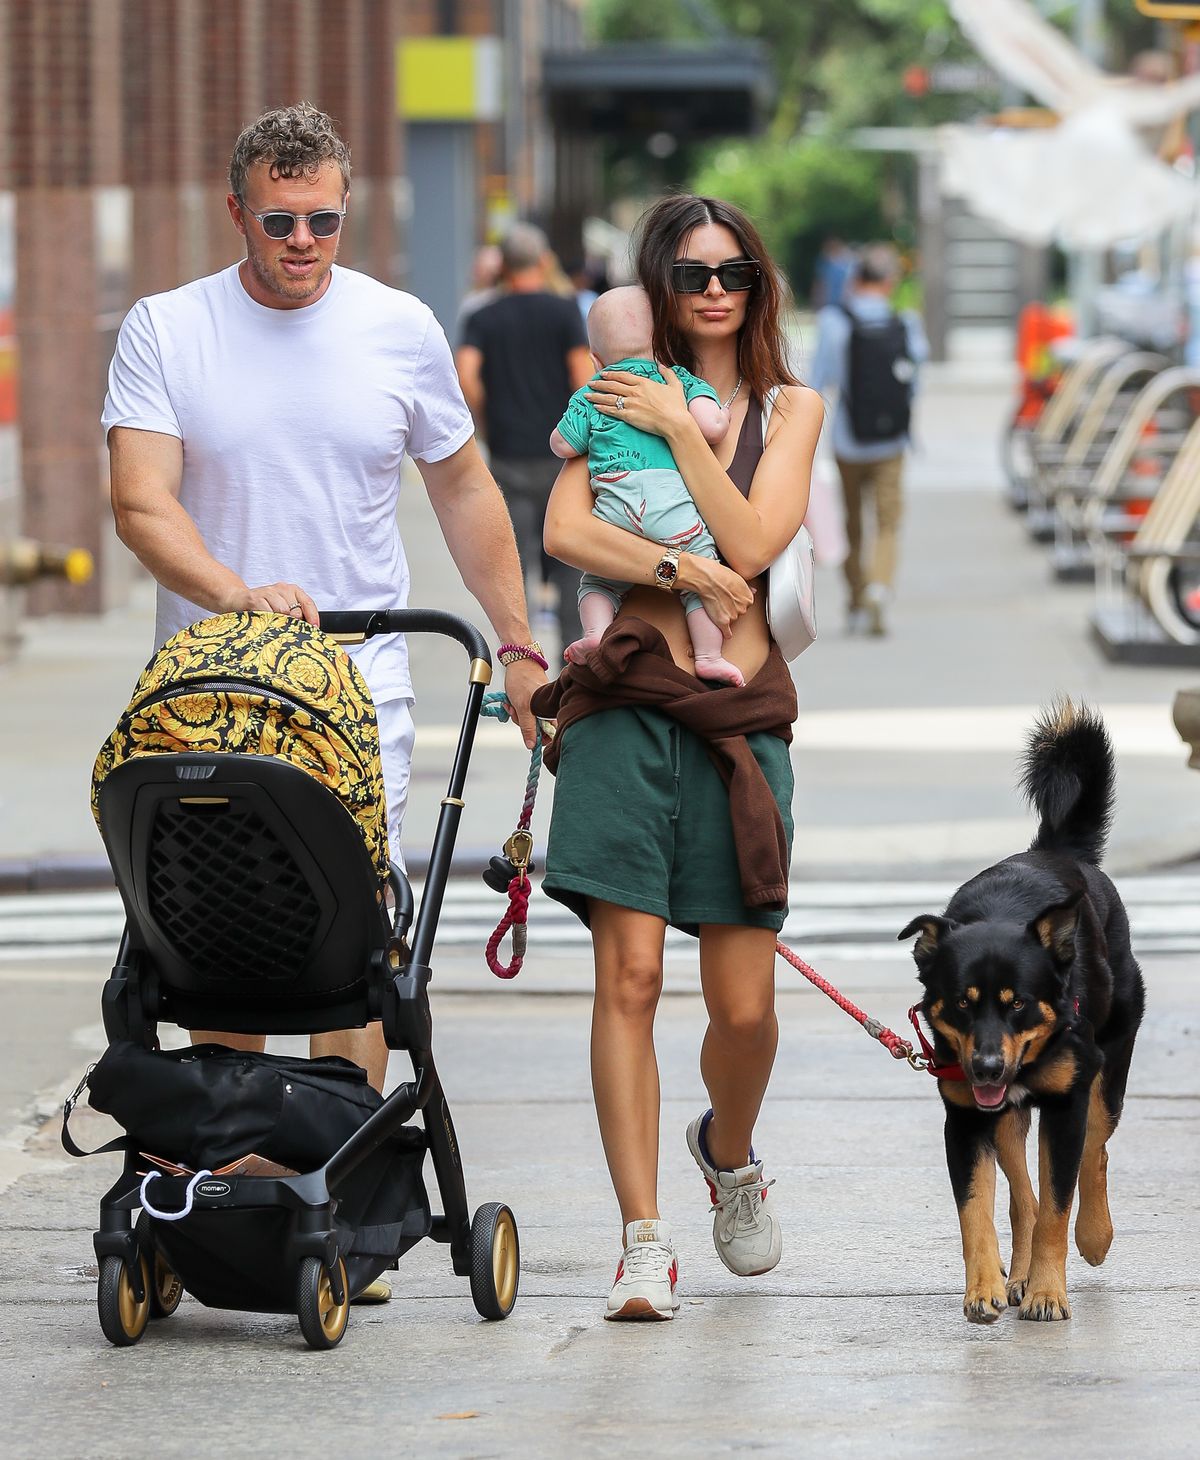 new york city, ny   july 10  emily ratajkowski is seen out for a walk with her baby and her husband sebastian bear mcclard  on july 10, 2021 in new york city, new york photo by megagc images